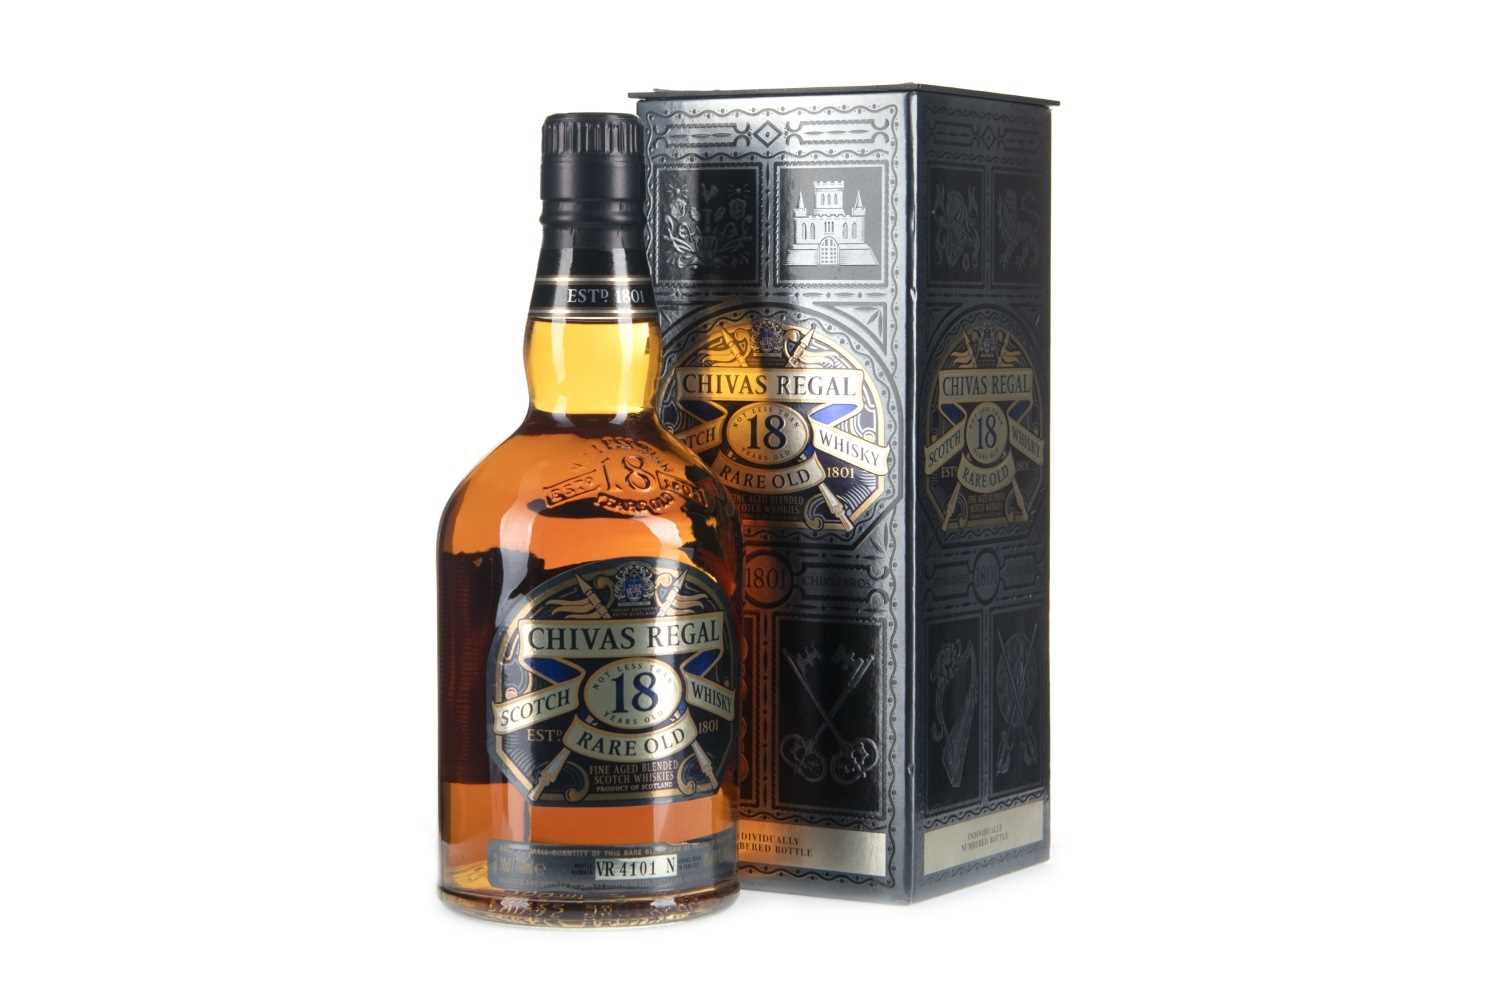 Lot 402 - CHIVAS REGAL RARE OLD 18 YEARS OLD